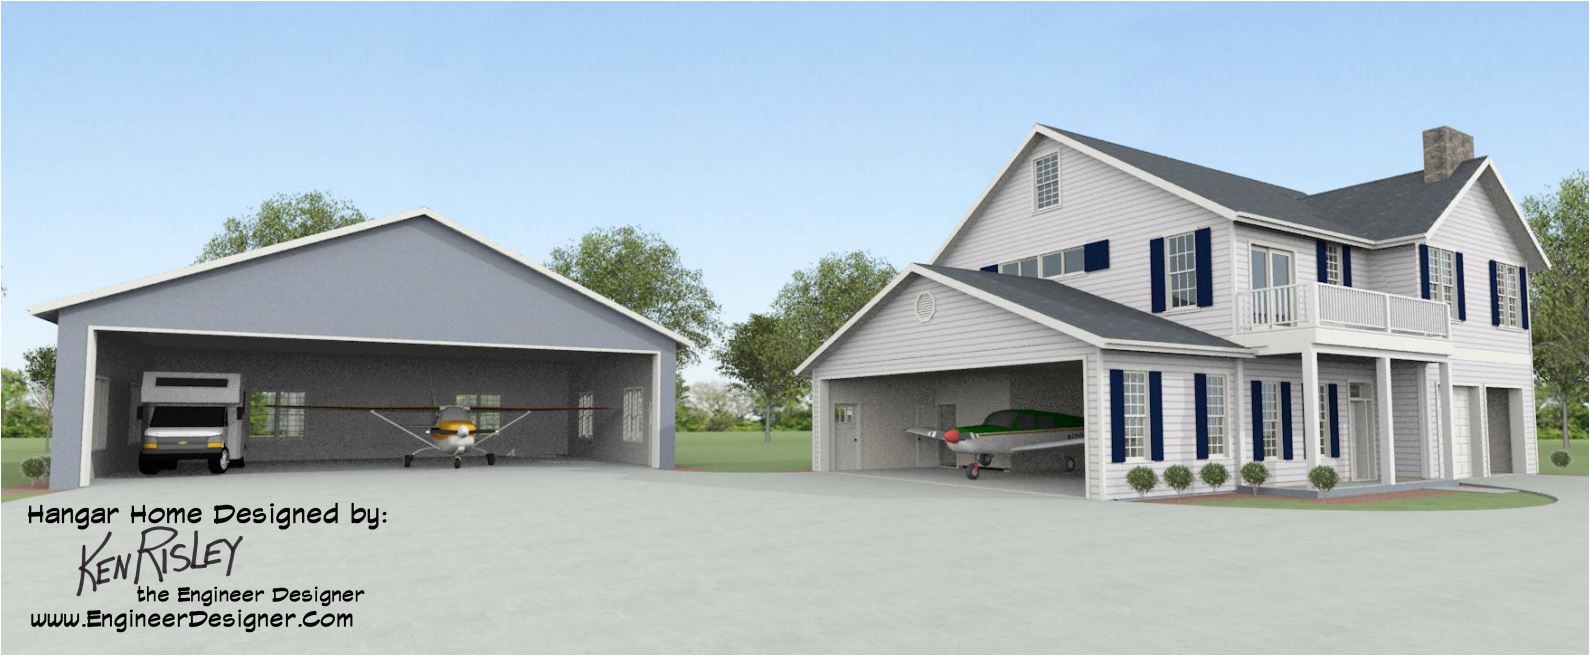 when considering a hangar home design these points should be kept in mind